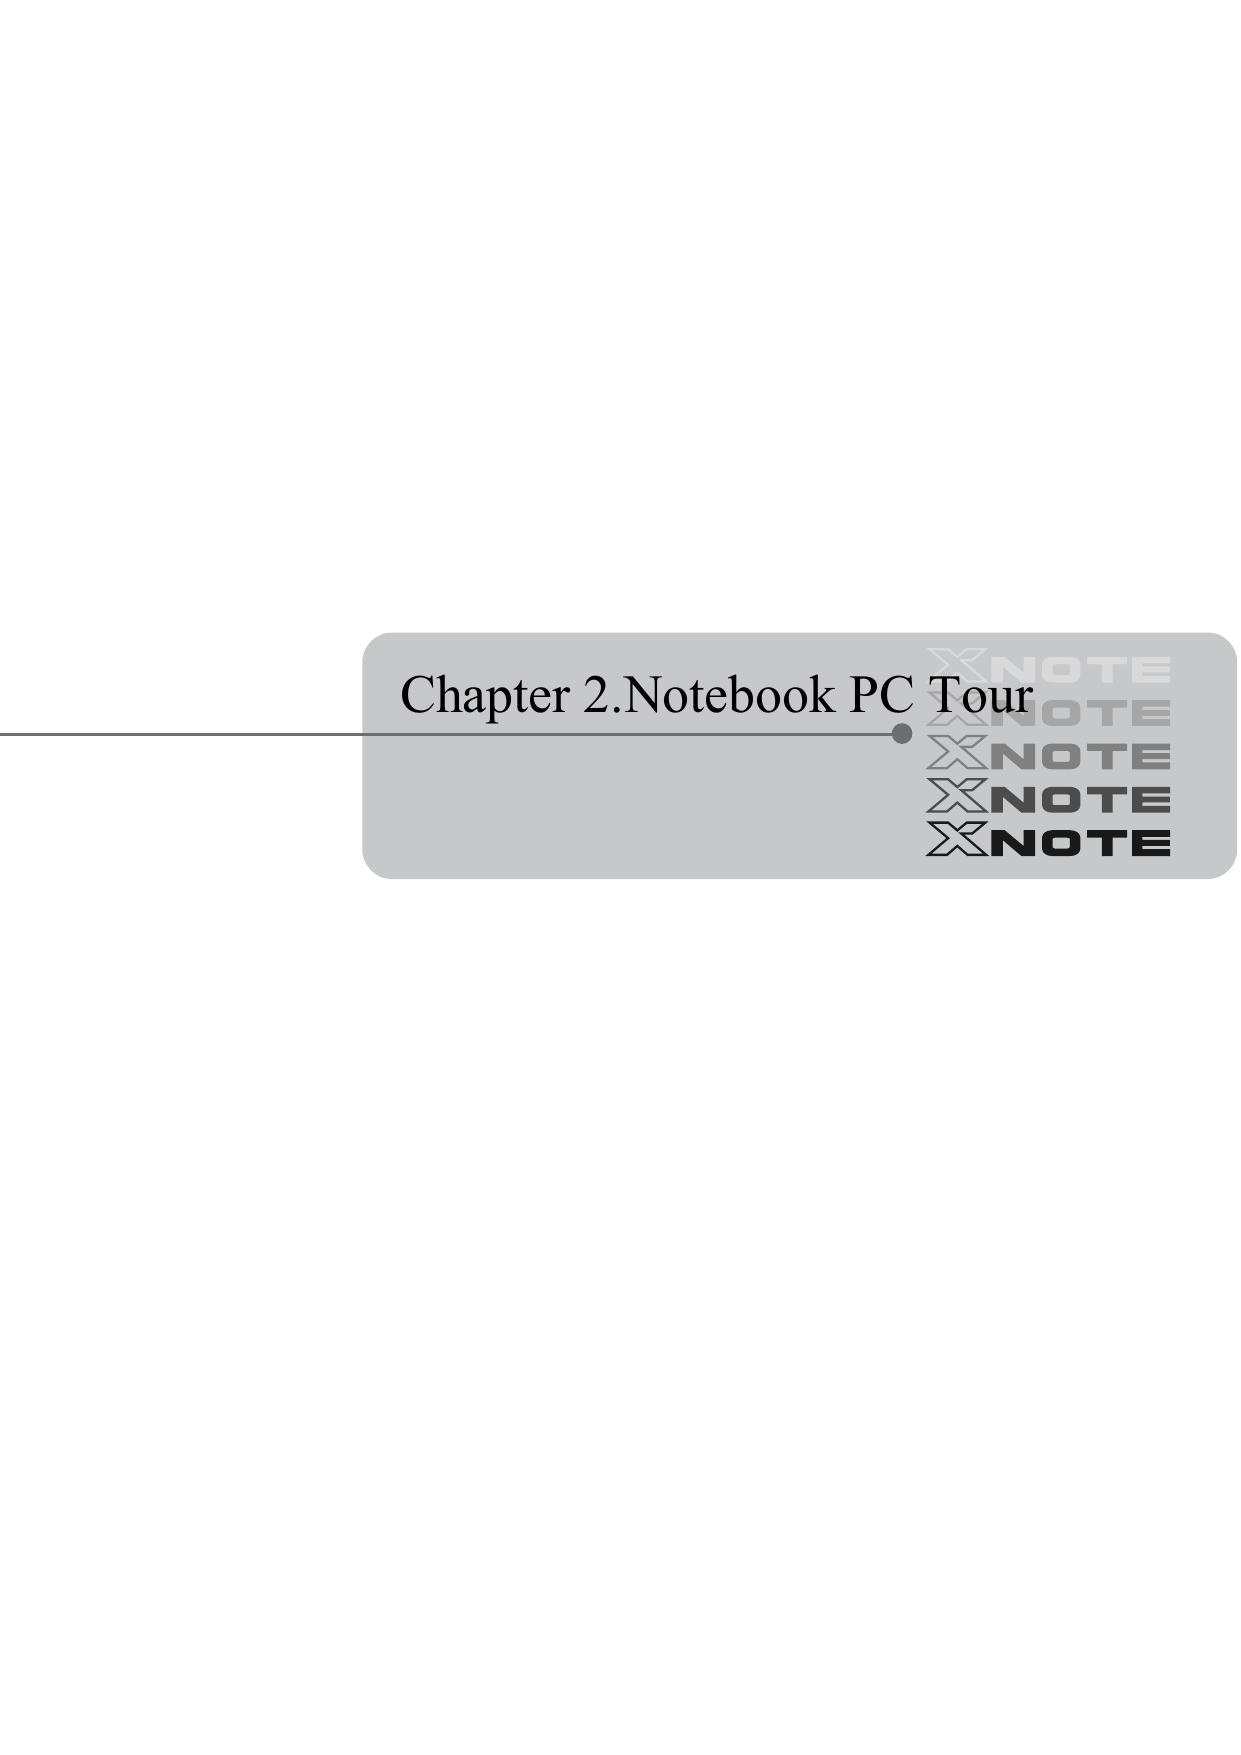  Chapter 2.Notebook PC Tour